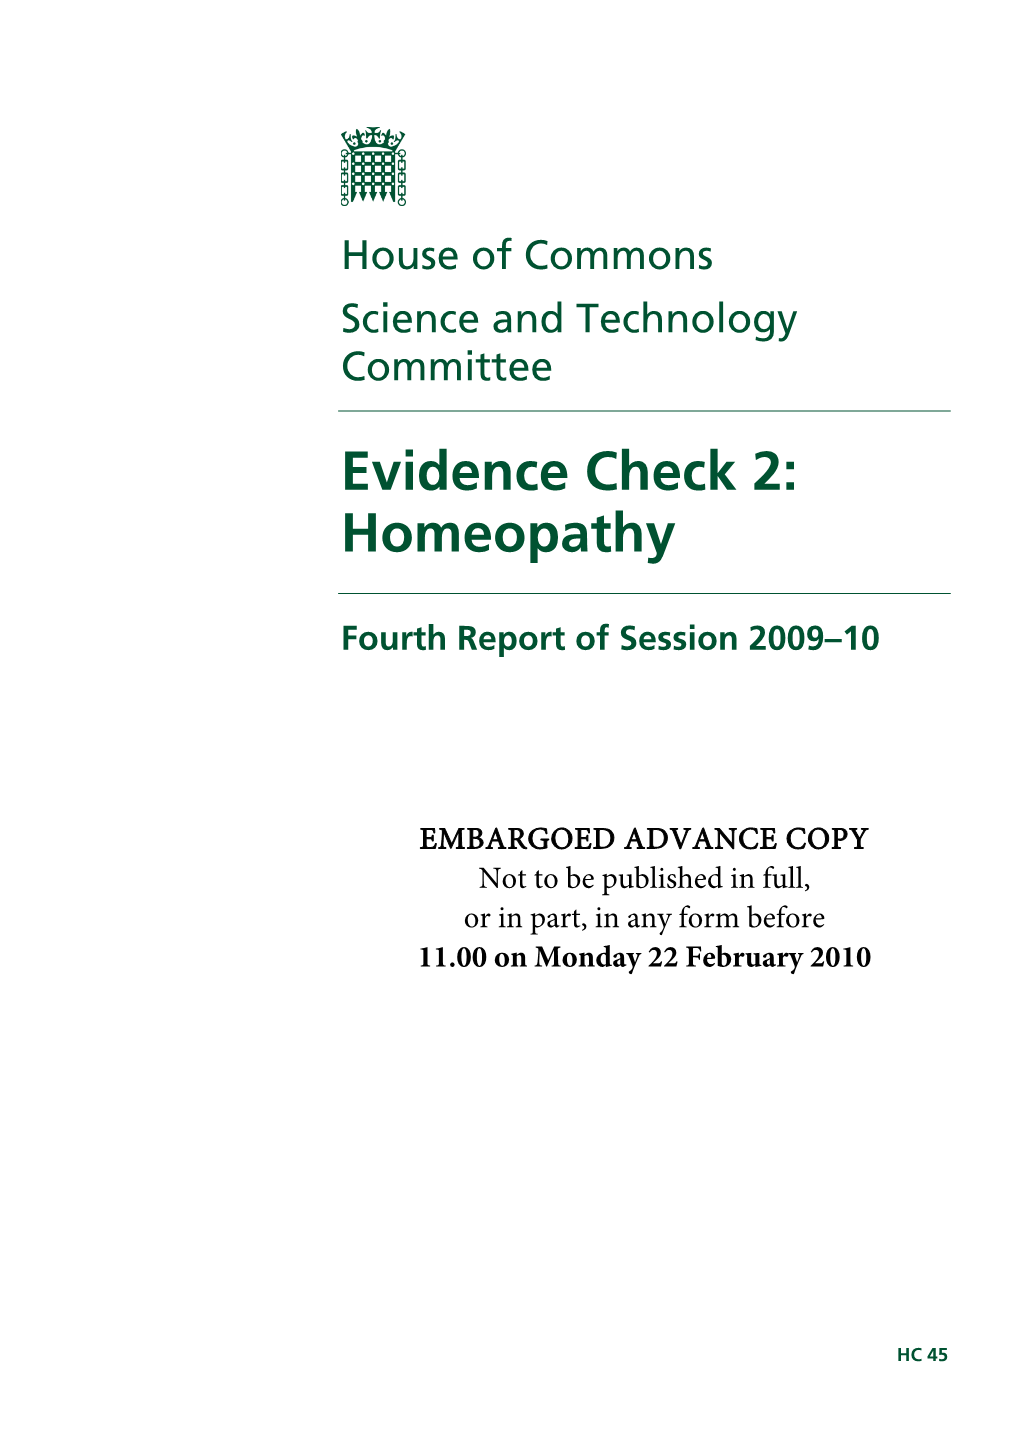 'Evidence Check 2: Homeopathy' Report